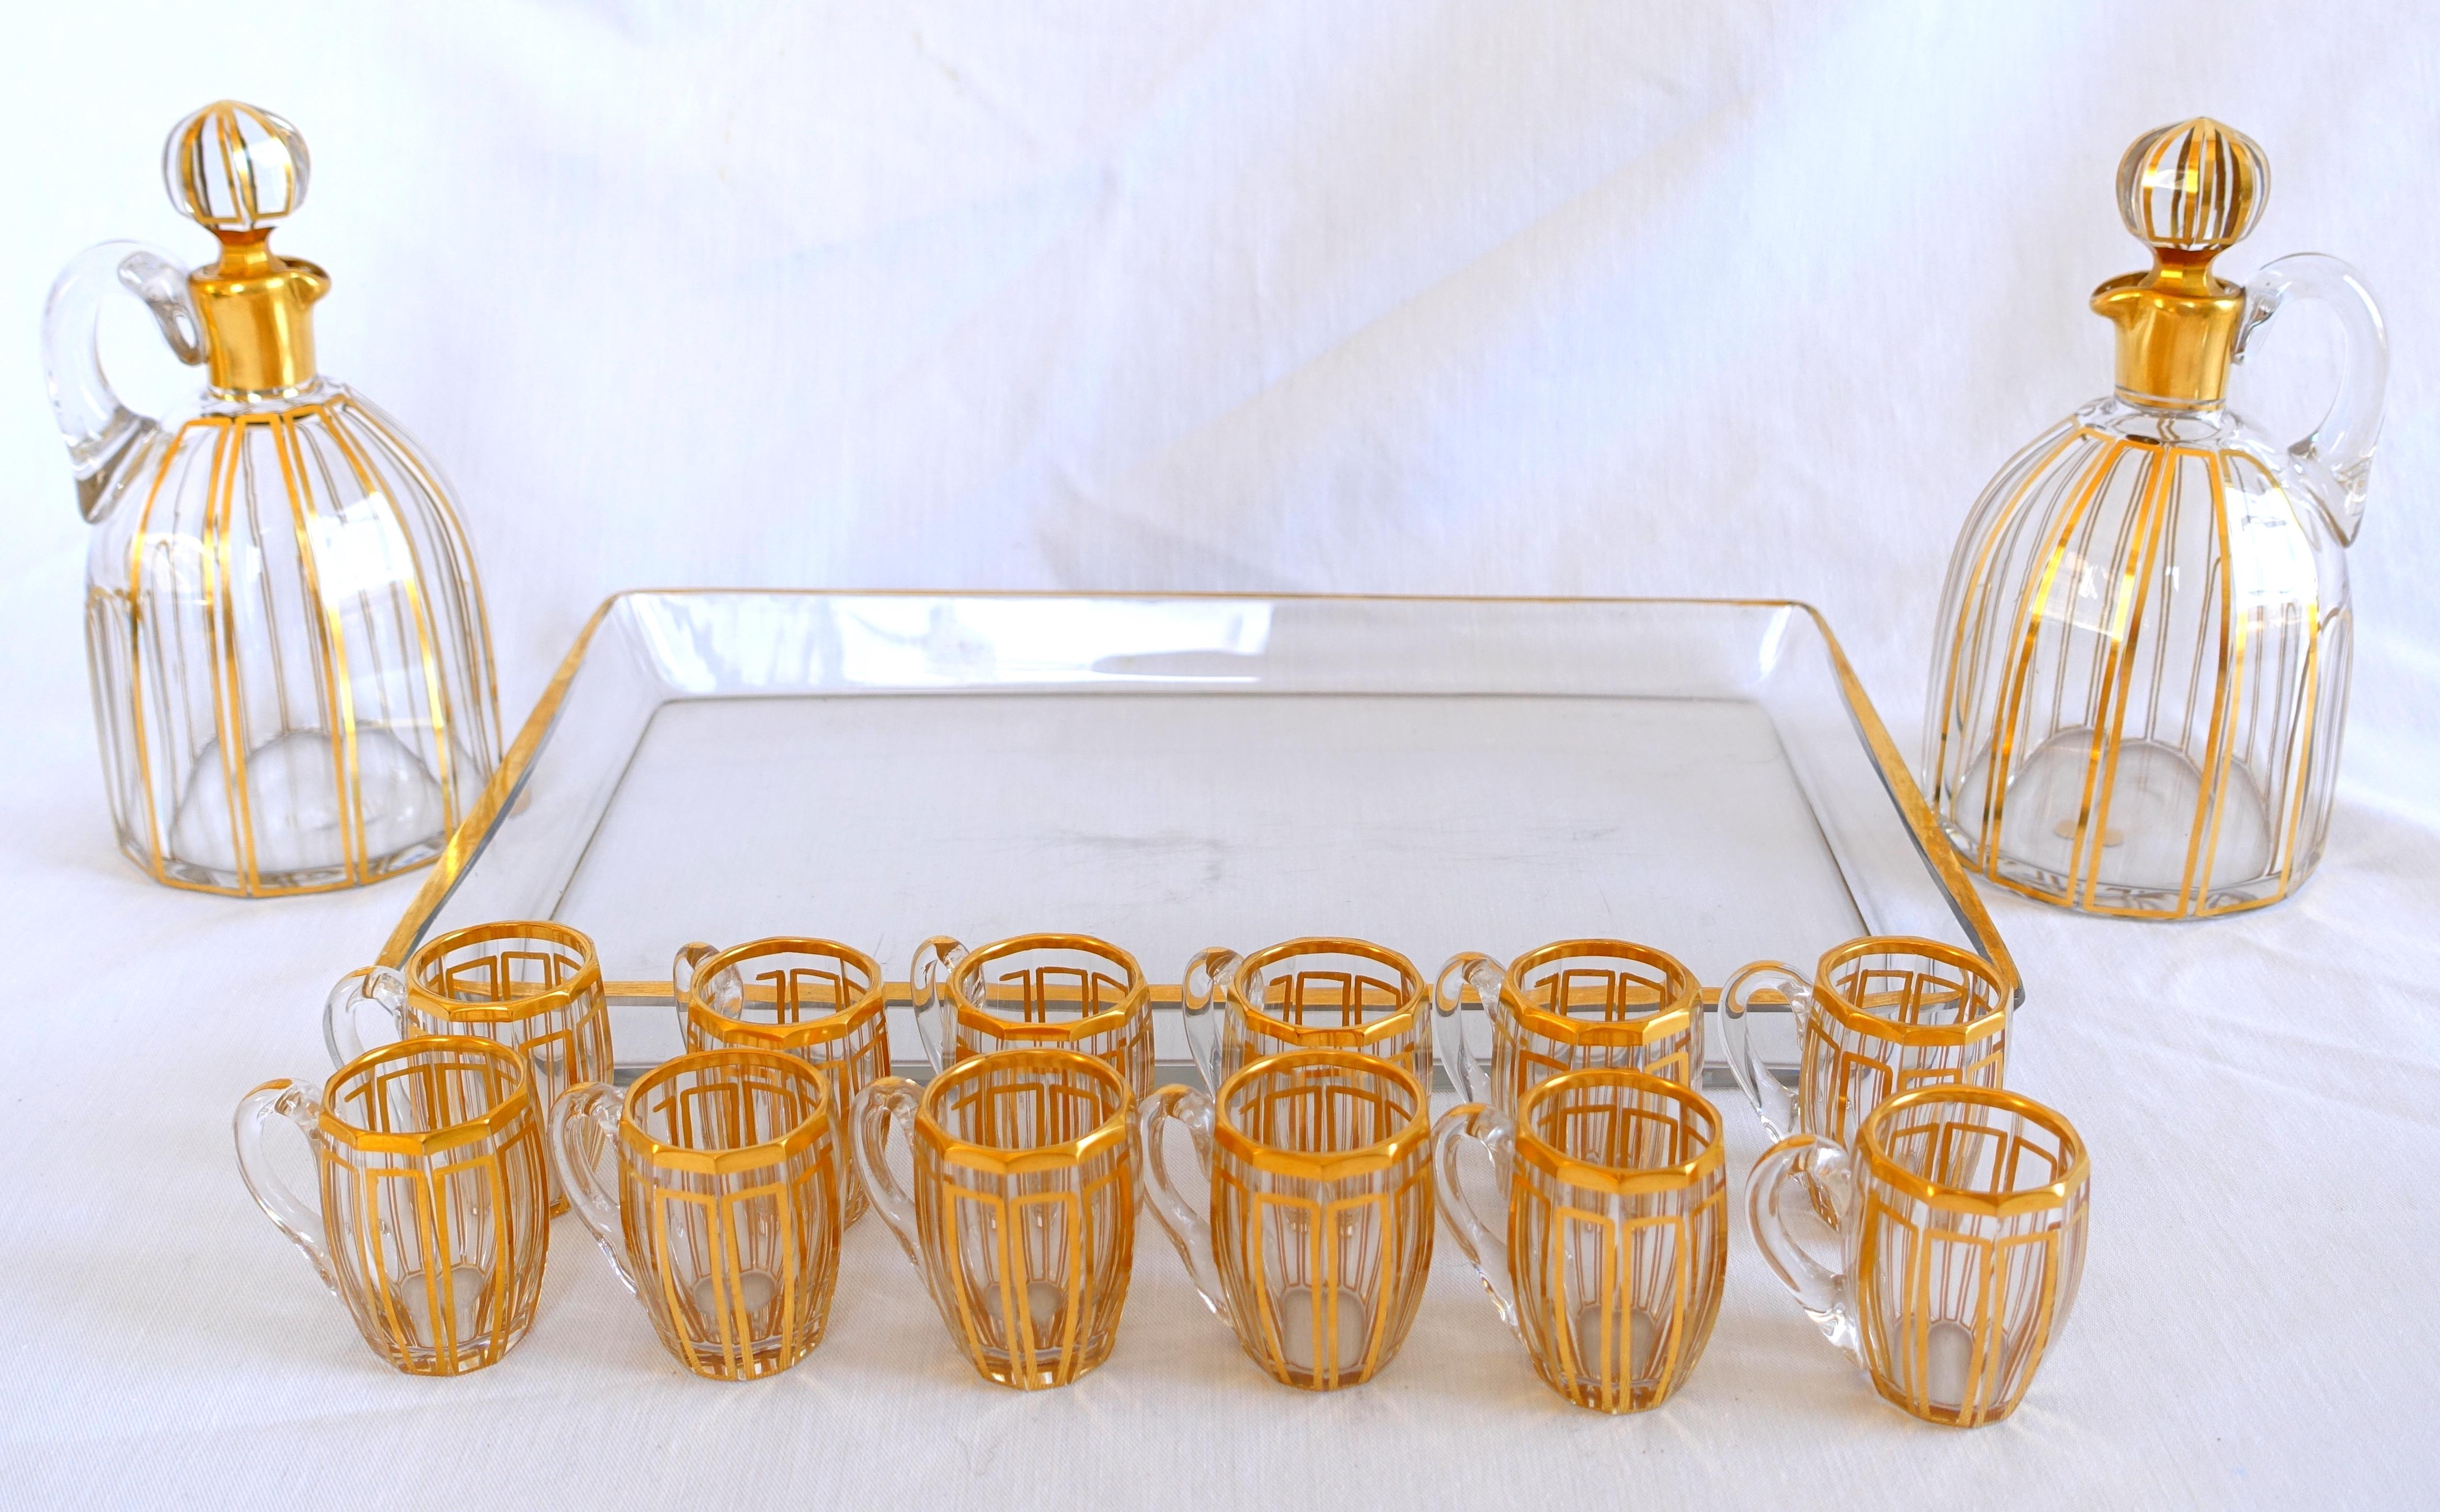 Gilt Baccarat crystal liquor set for 12, Cannelures cut pattern enhanced with gold